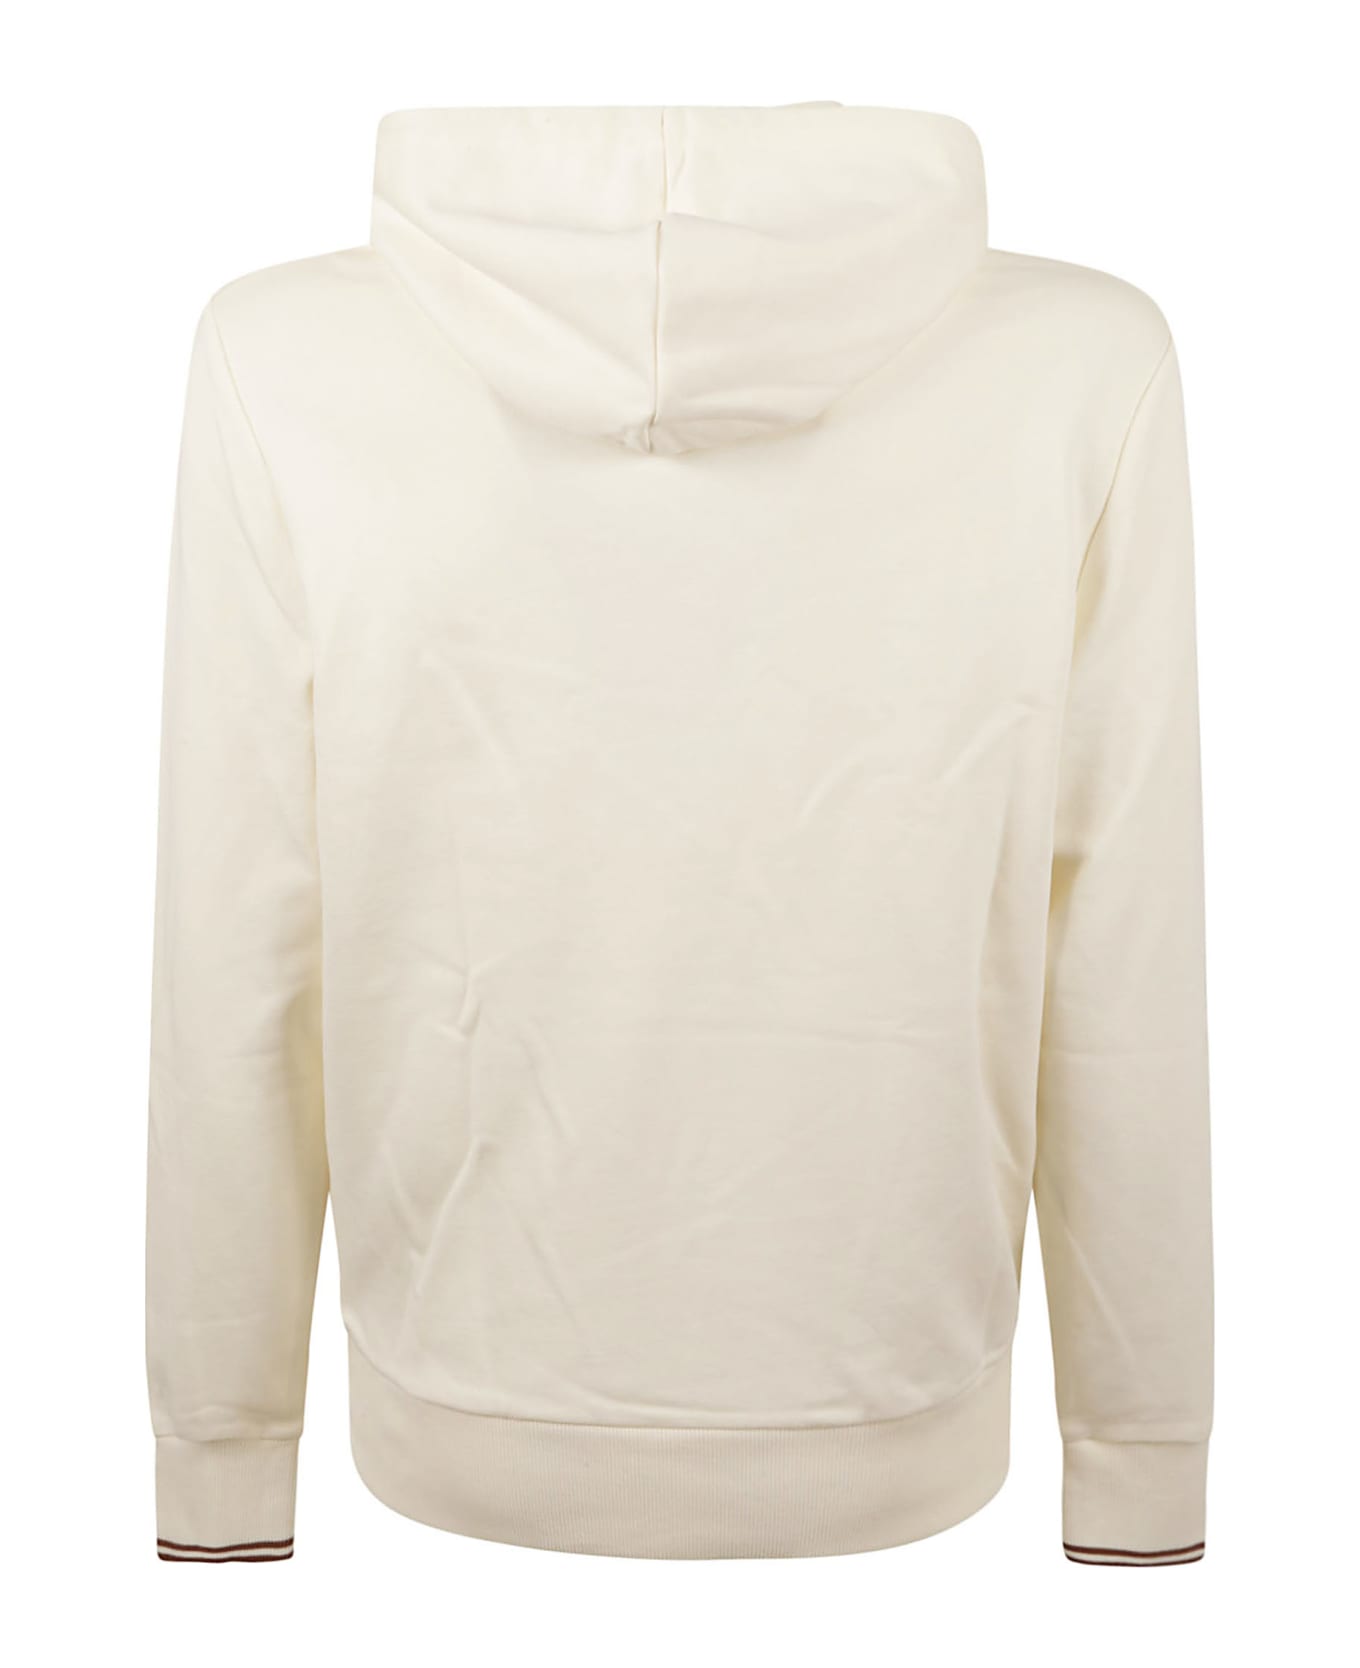 Fred Perry Tipped Hooded Sweatshirt - YELLOW